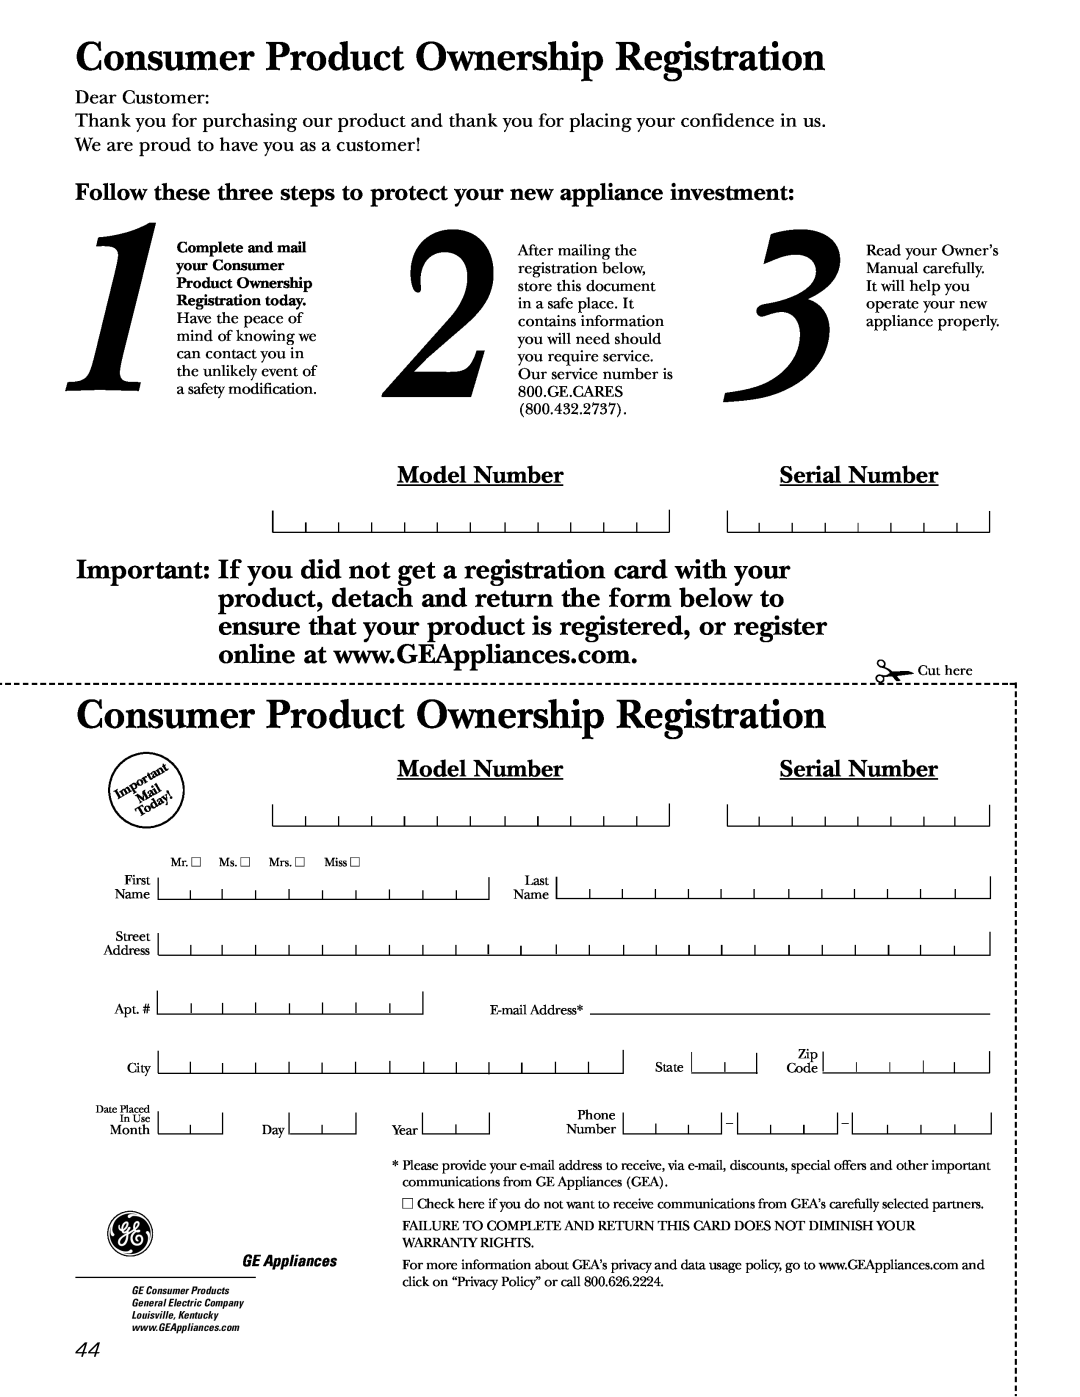 GE JGBC20 Model Number, Serial Number, Consumer Product Ownership Registration, Complete and mail, your Consumer 